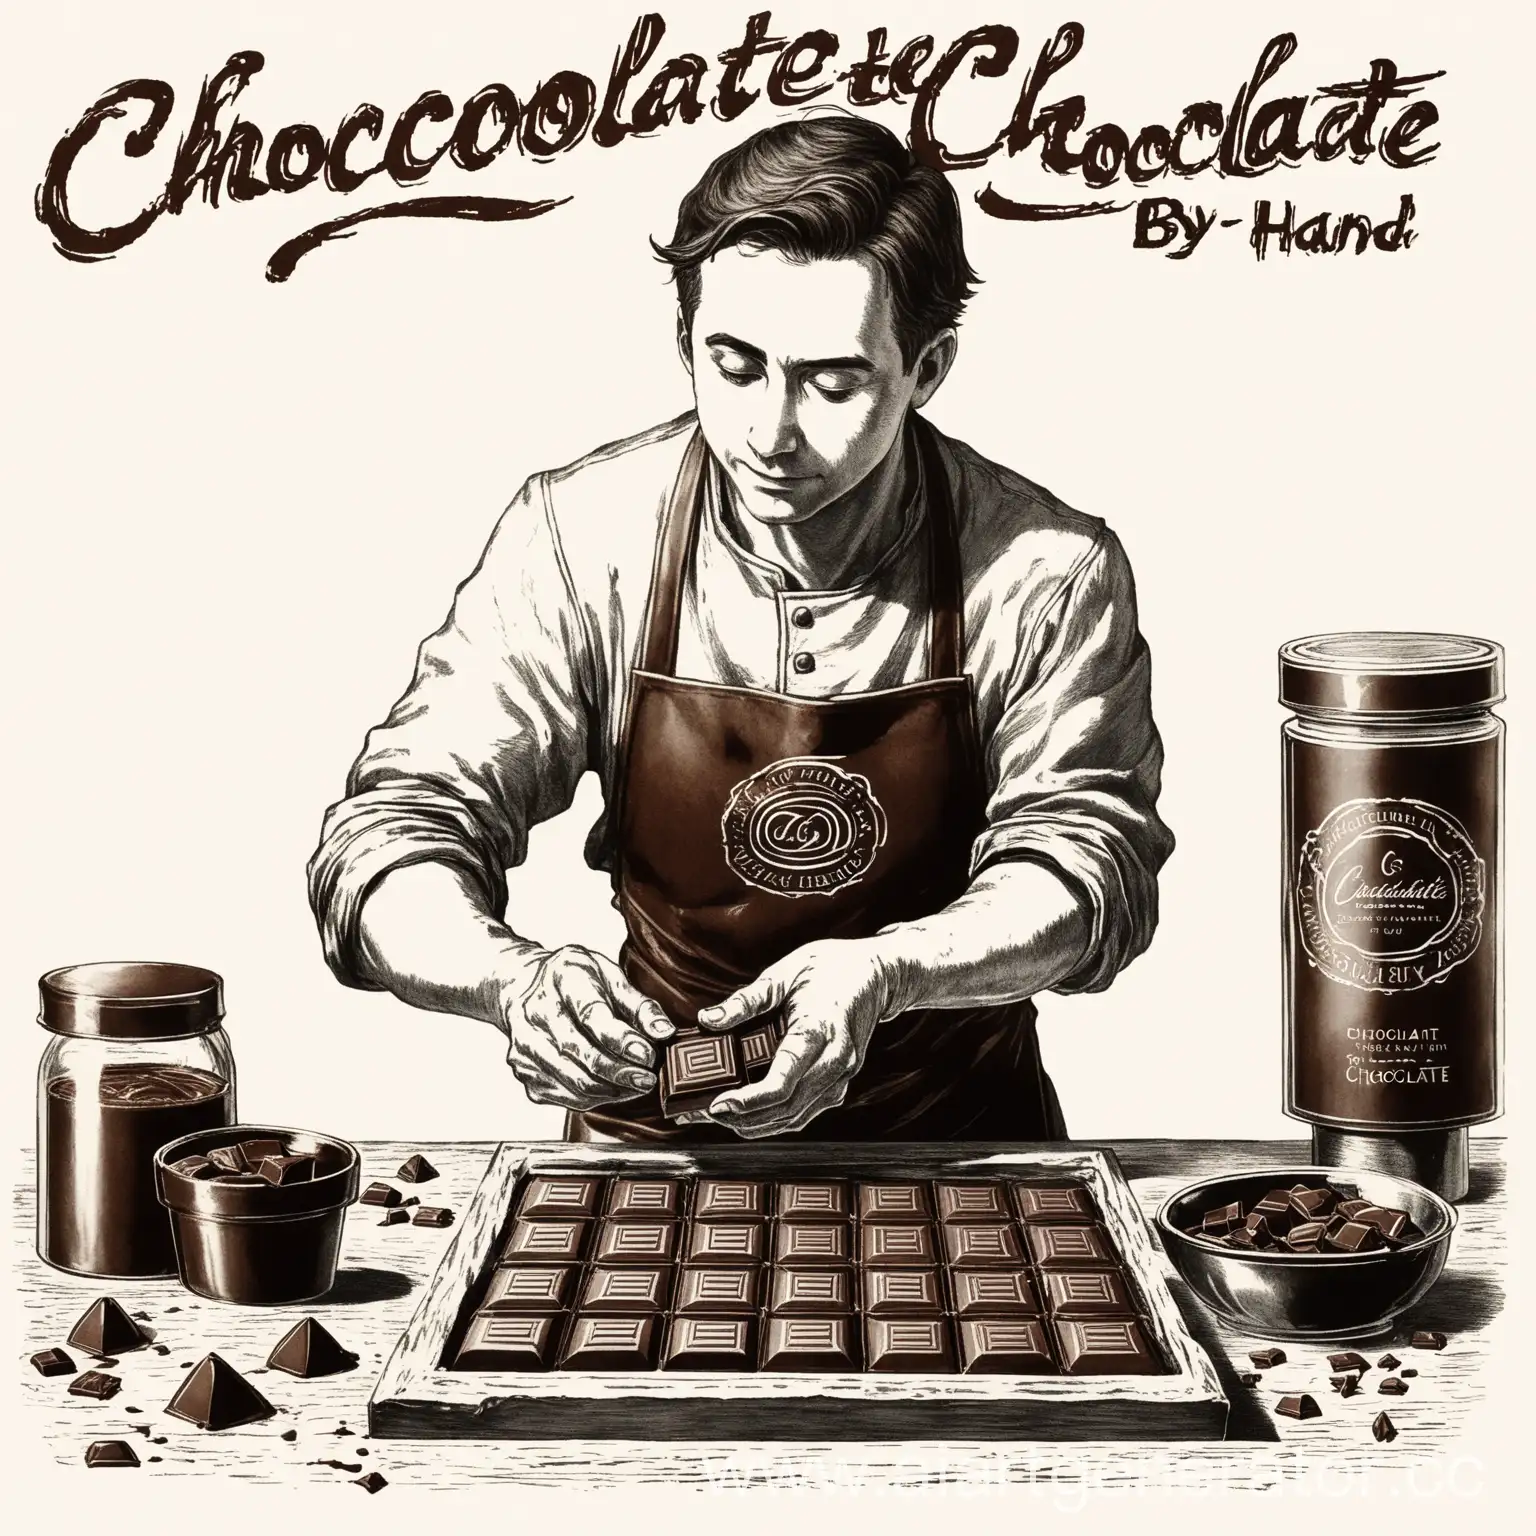 Handcrafting-Chocolate-Skilled-Artisan-Etching-on-White-Background